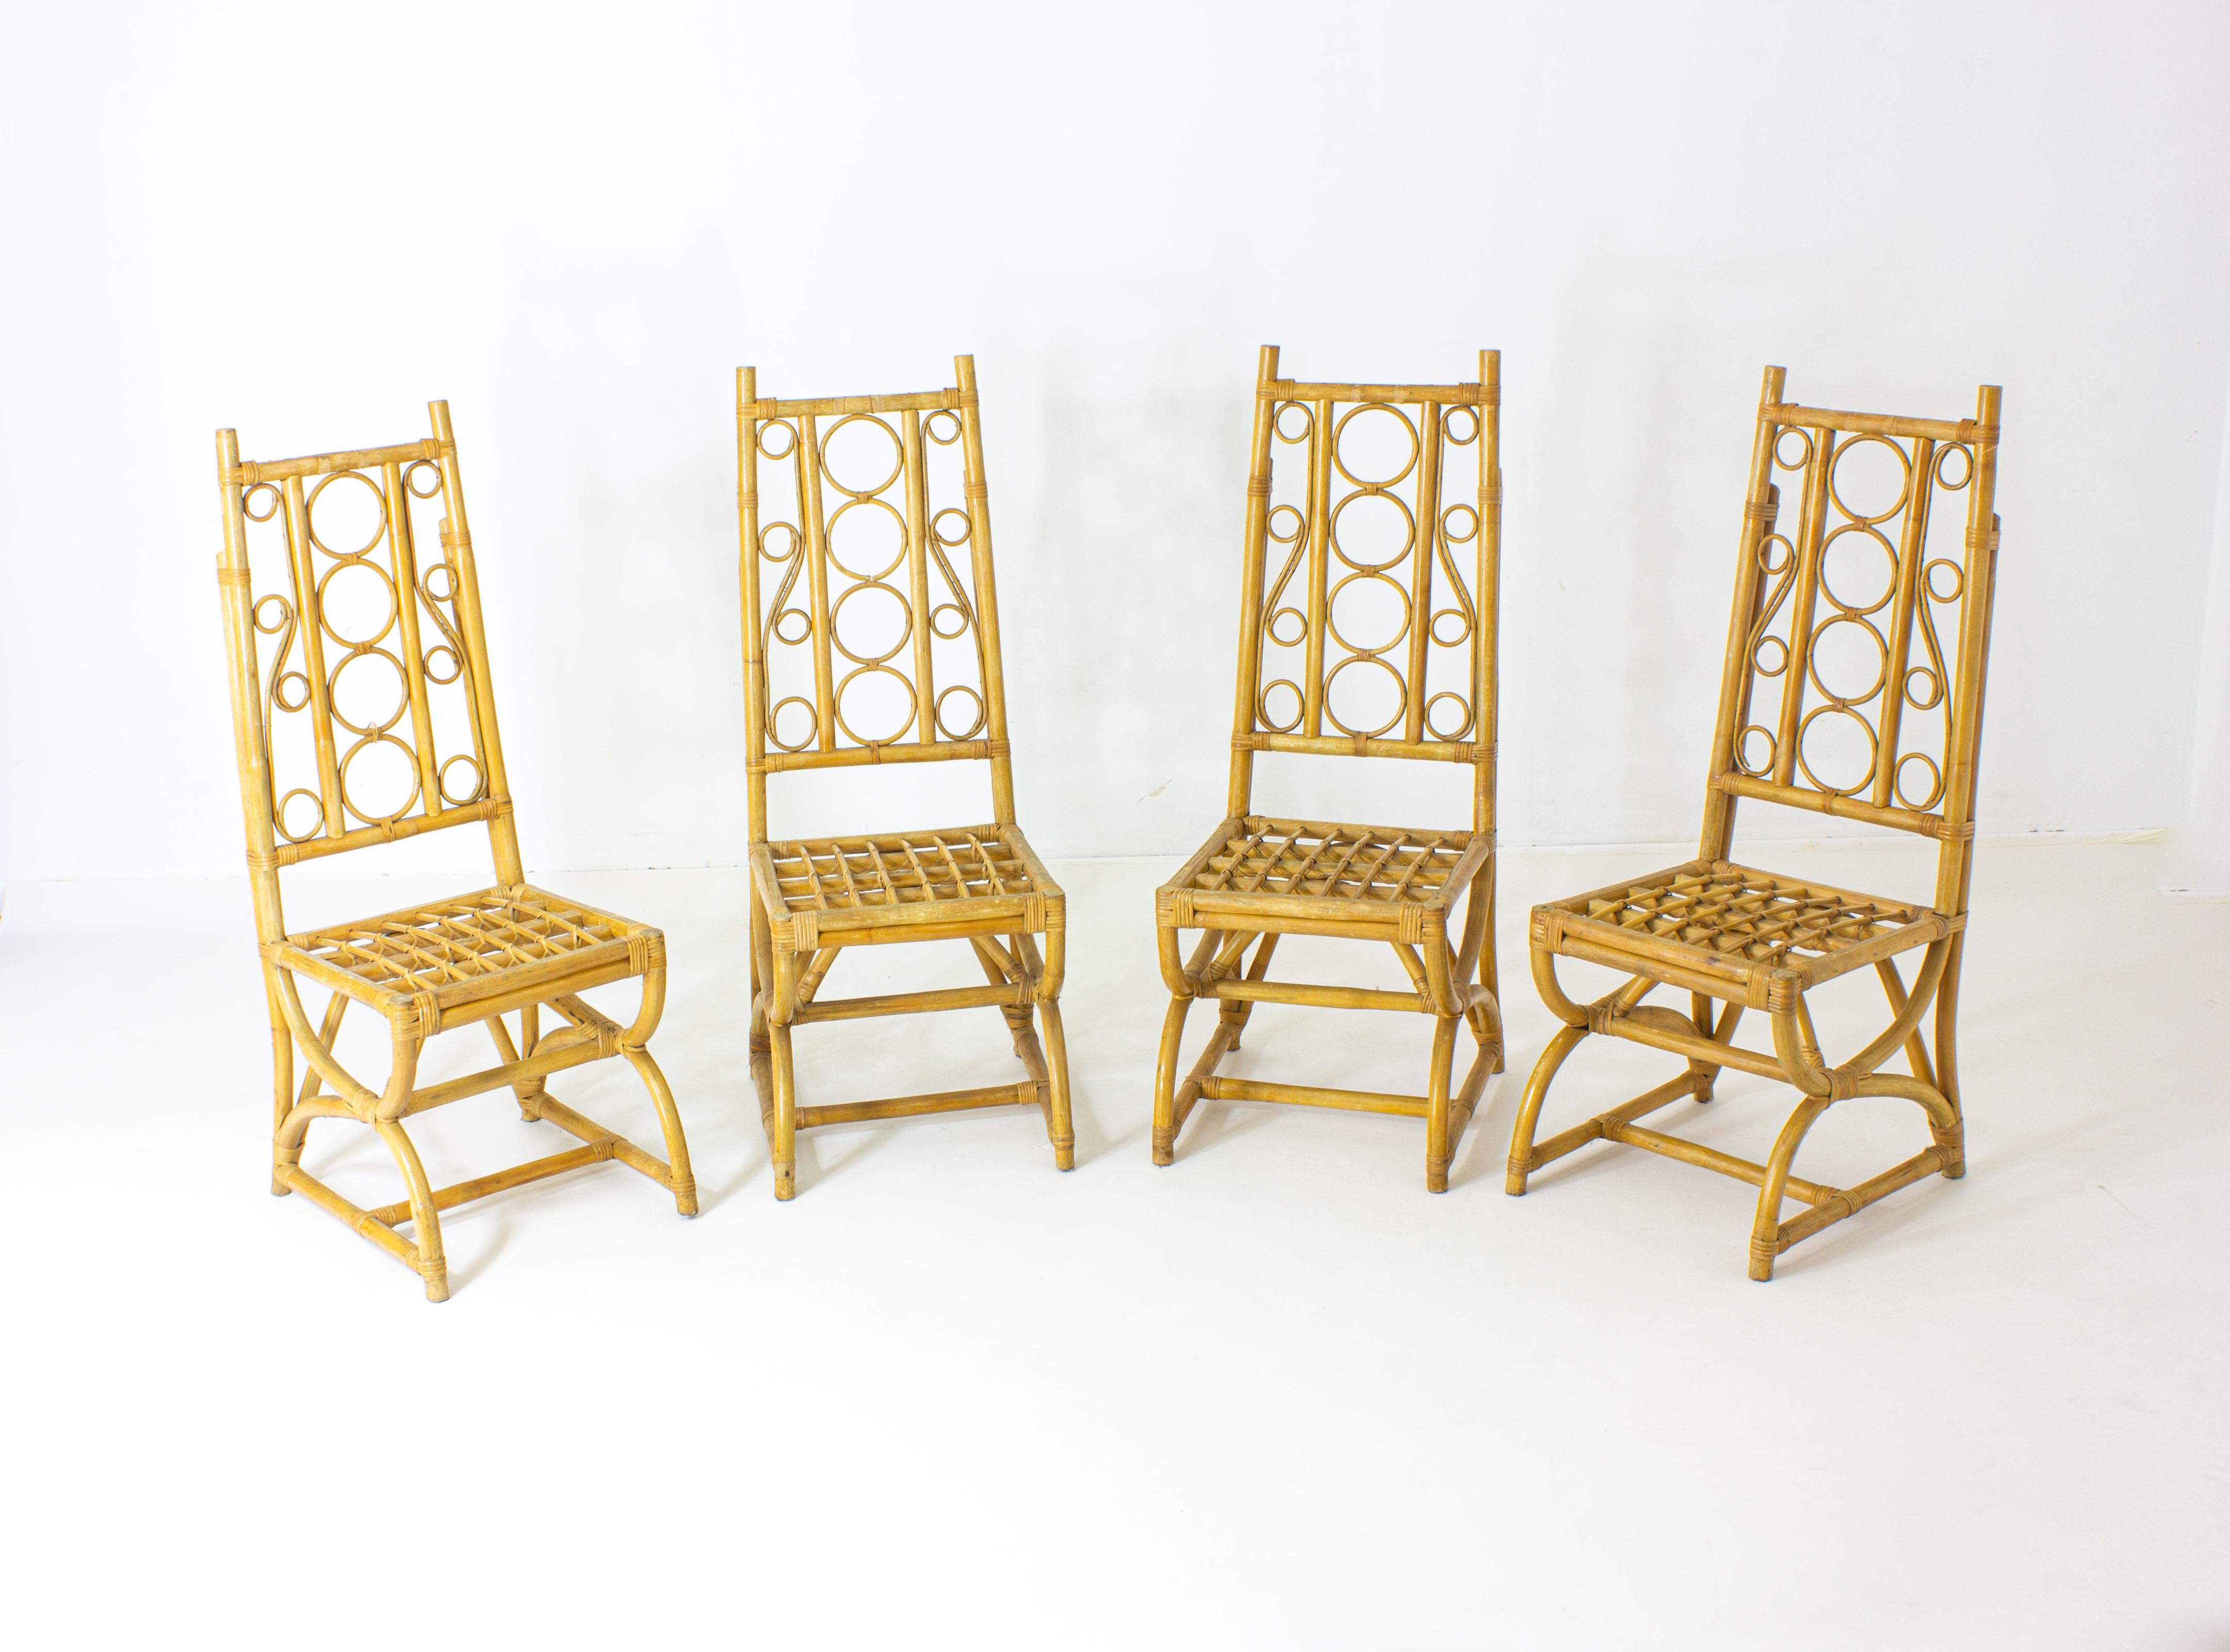 Hollywood Regency Set of 4 tropically ornate bamboo chairs. For Sale